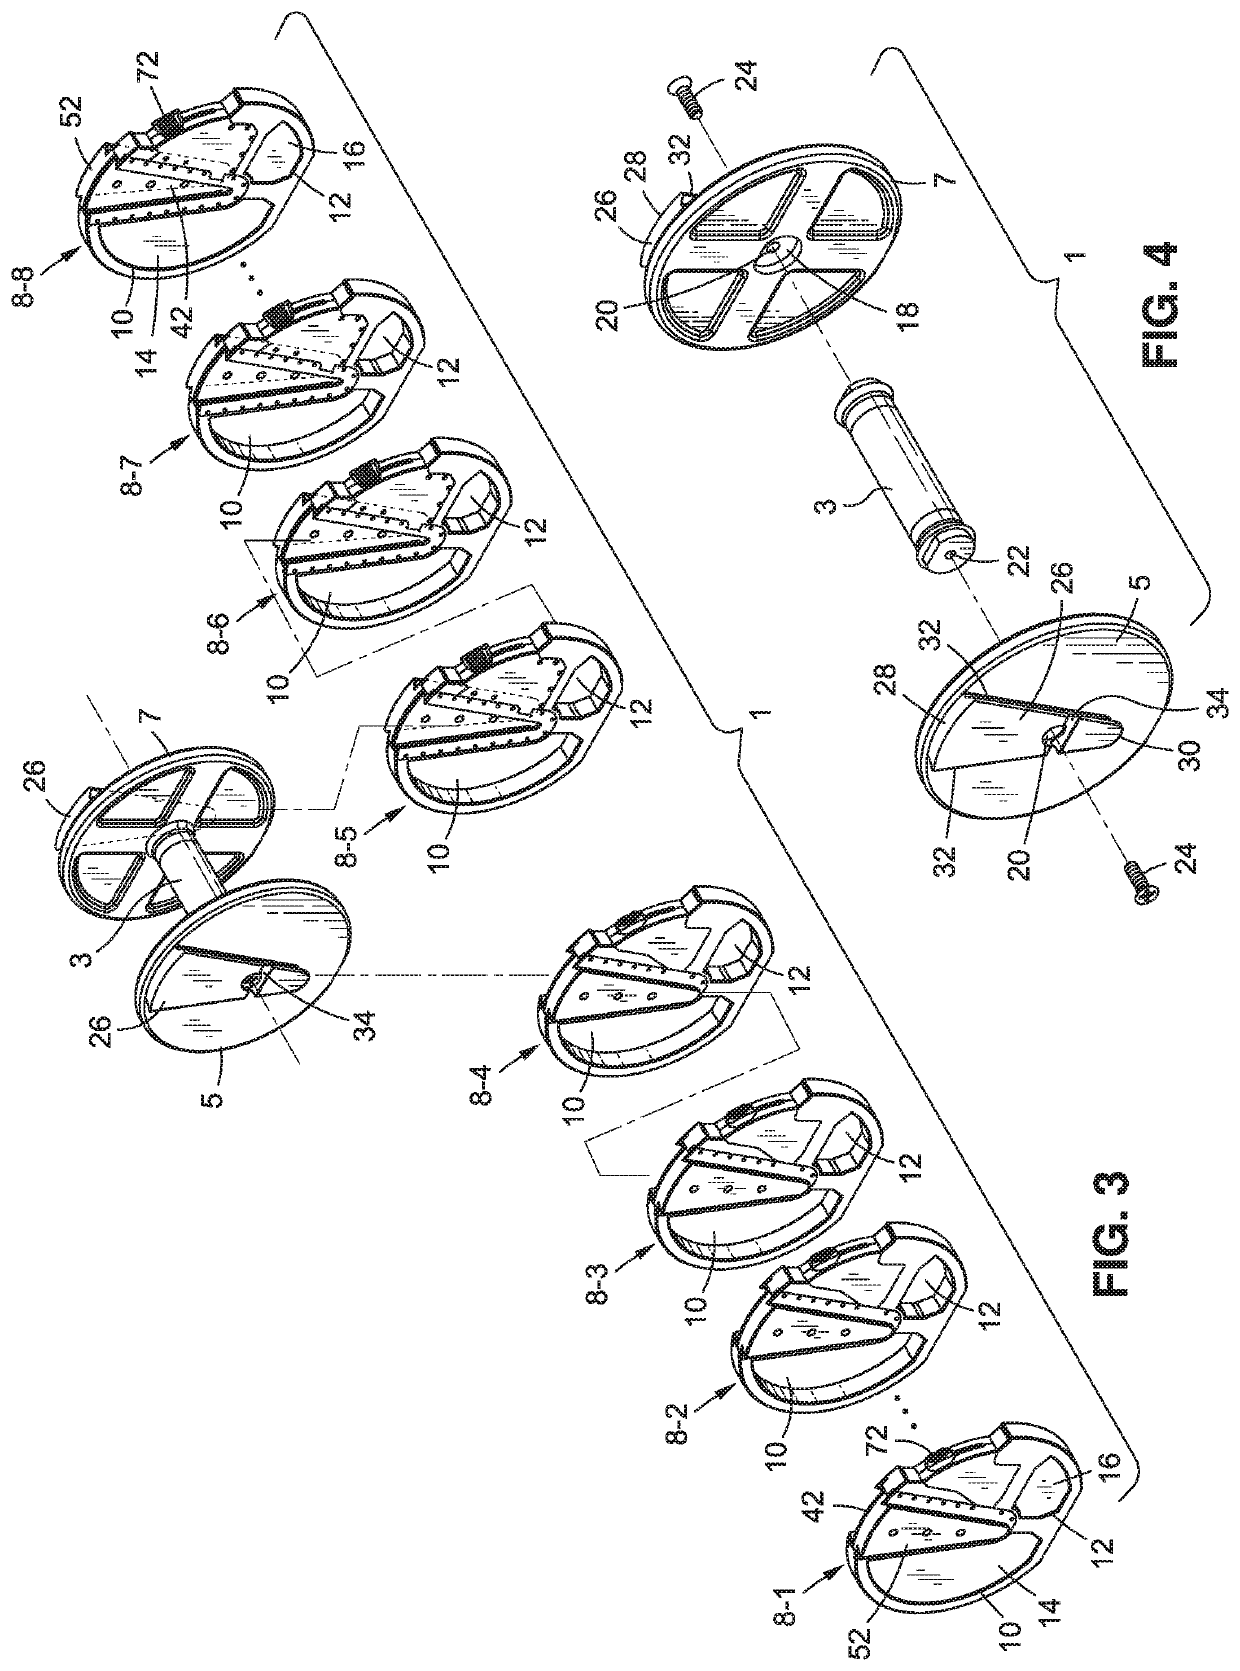 Dumbbell weight training device having selectively connected weight plates